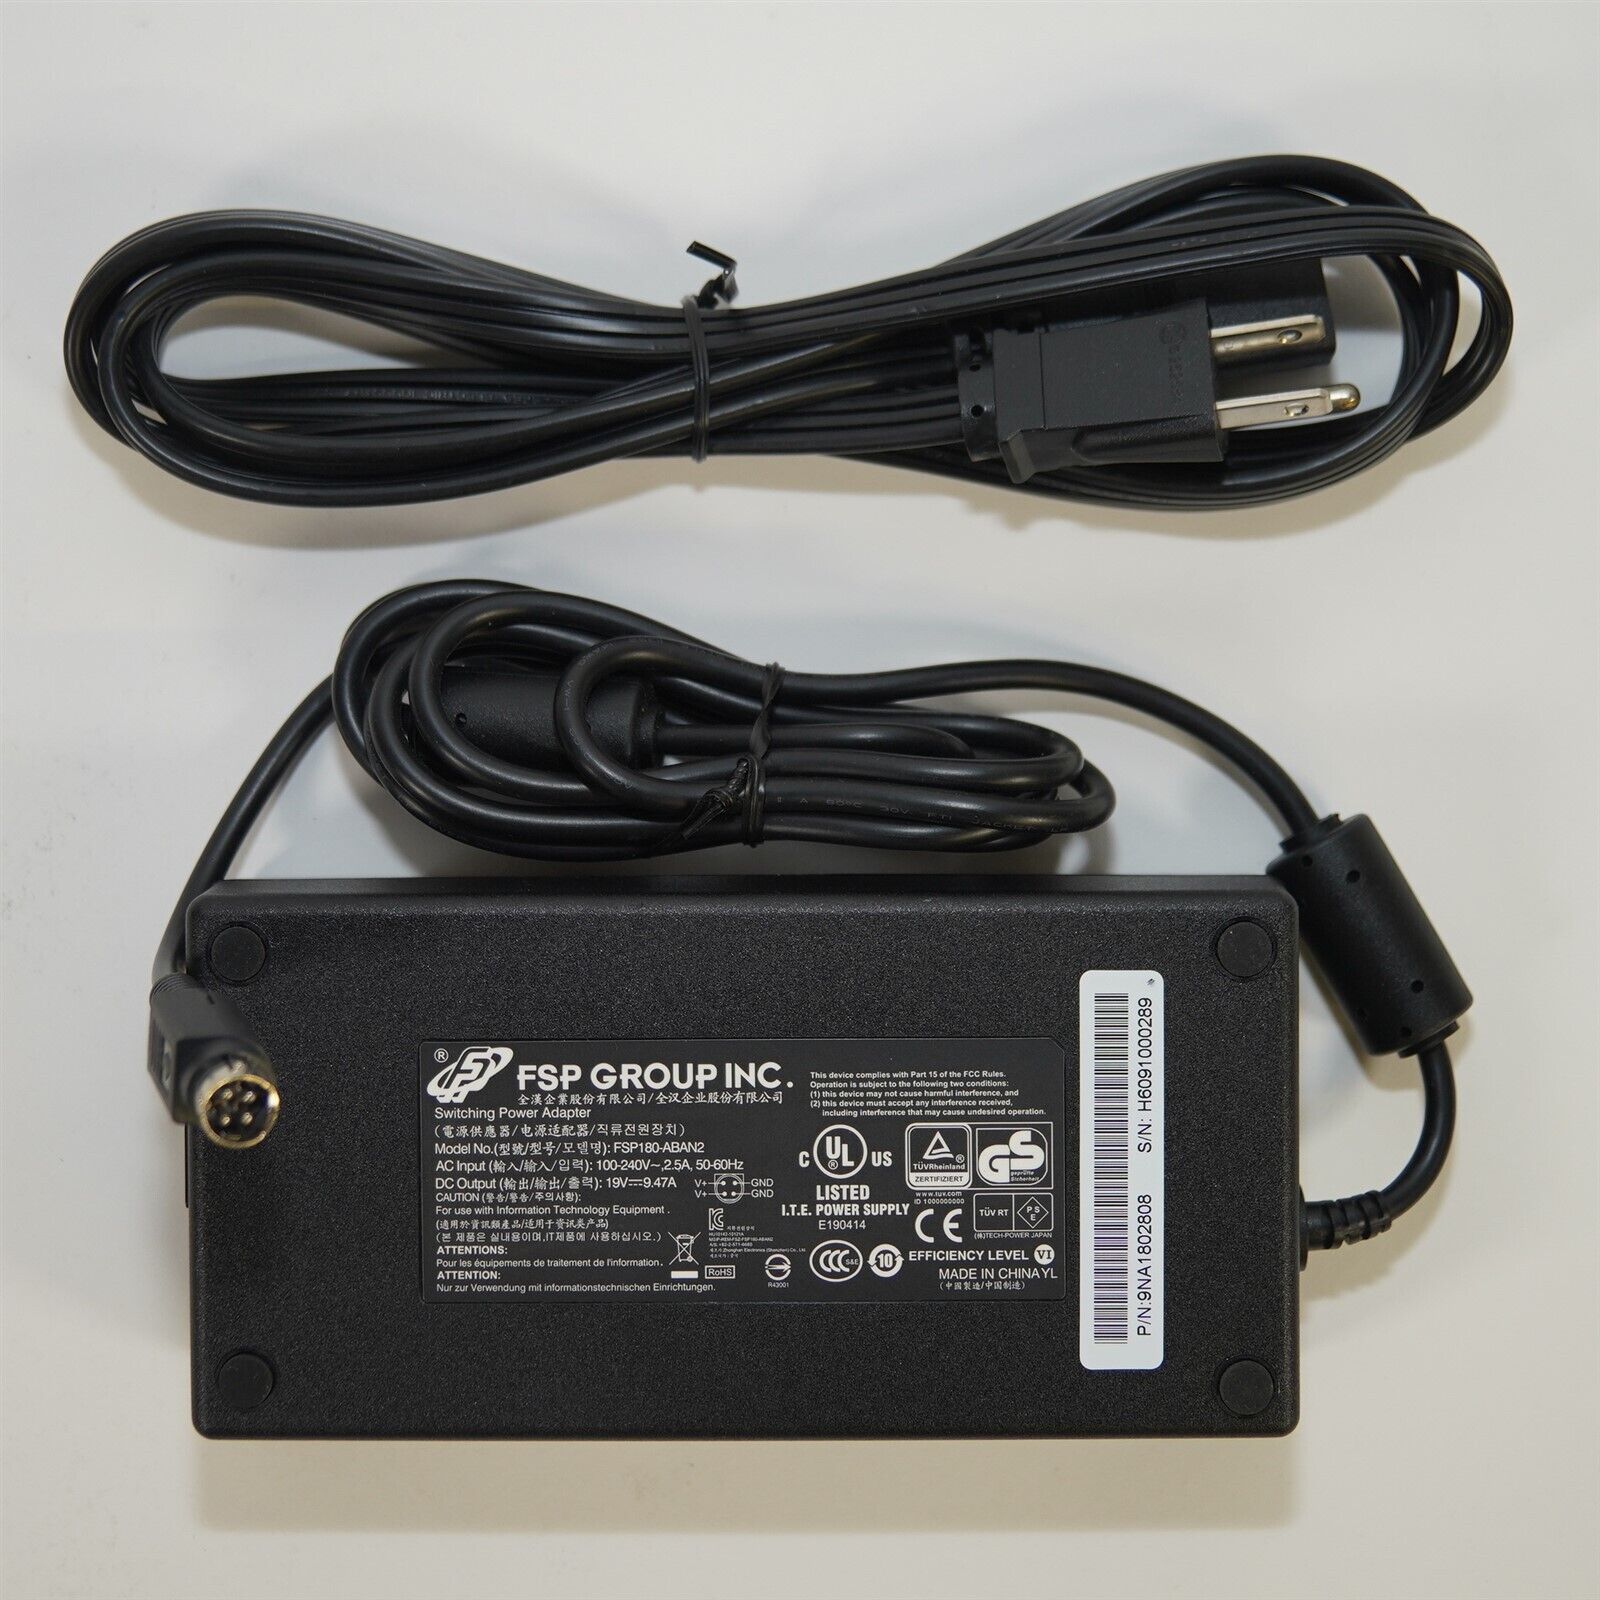 FSP Group 4-Pin 19V/9.47A Switching Power Supply Adapter with Cord FSP180-ABAN2